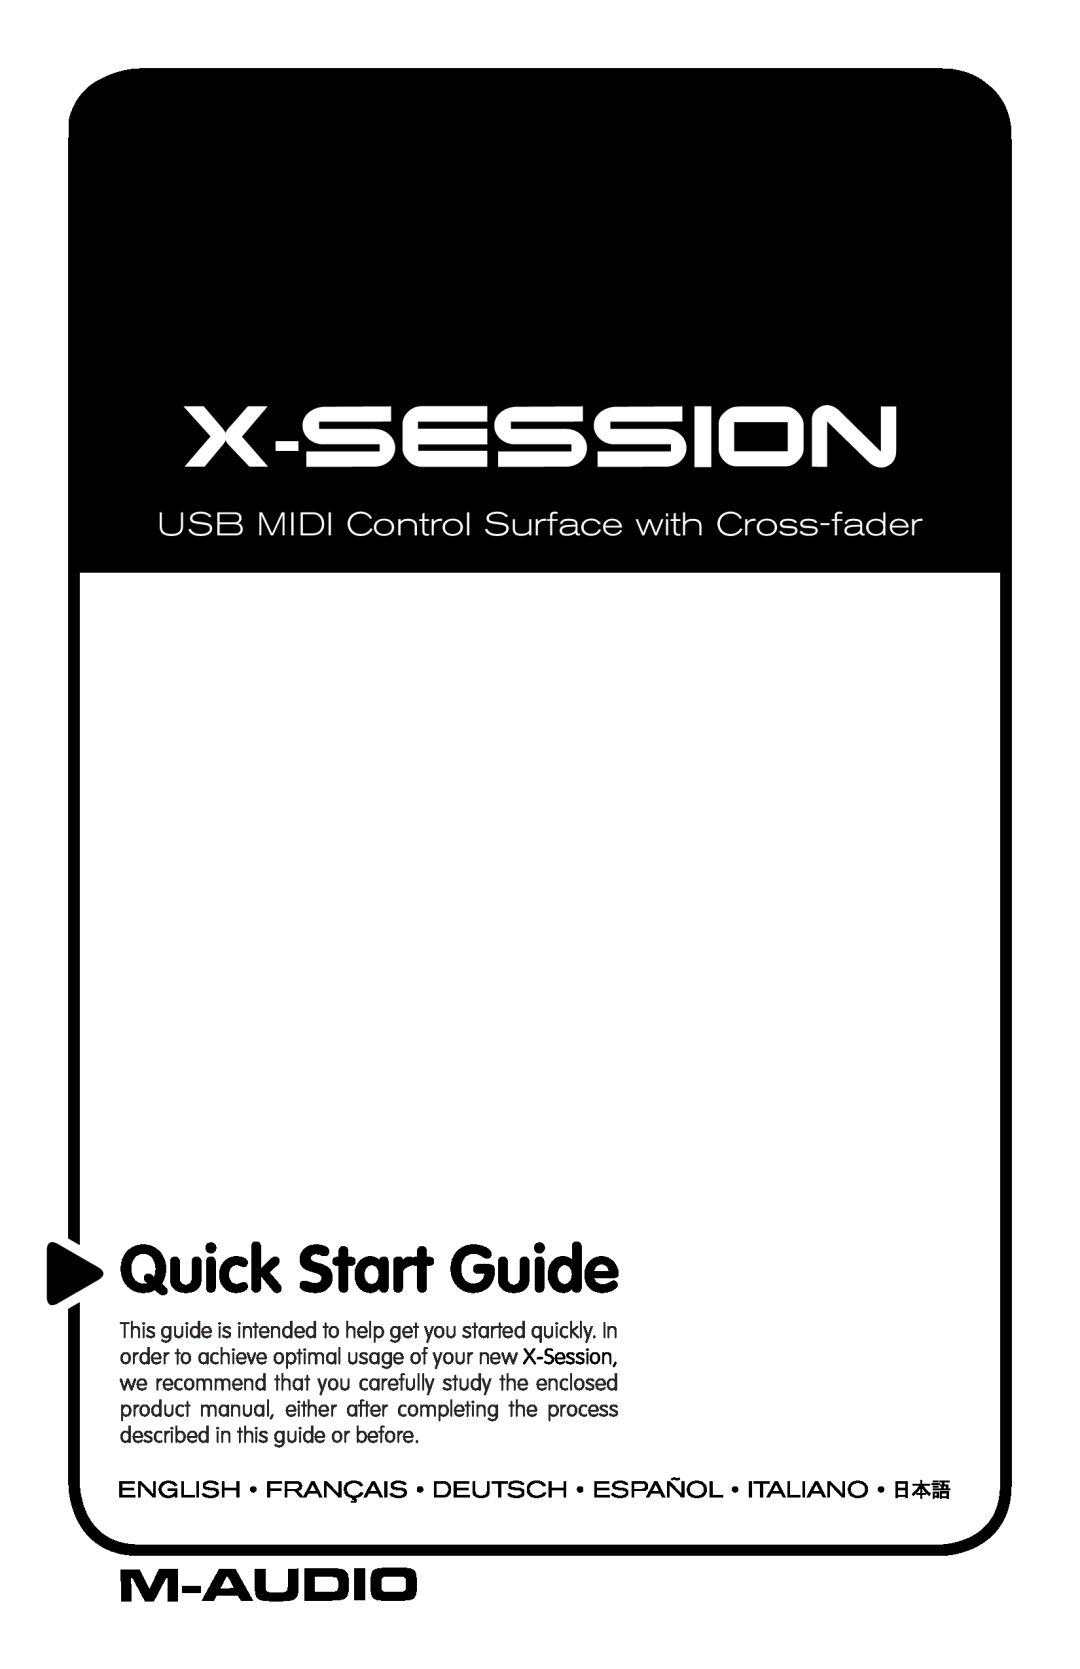 M-Audio X-Session quick start Quick Start Guide, USB MIDI Control Surface with Cross-fader 